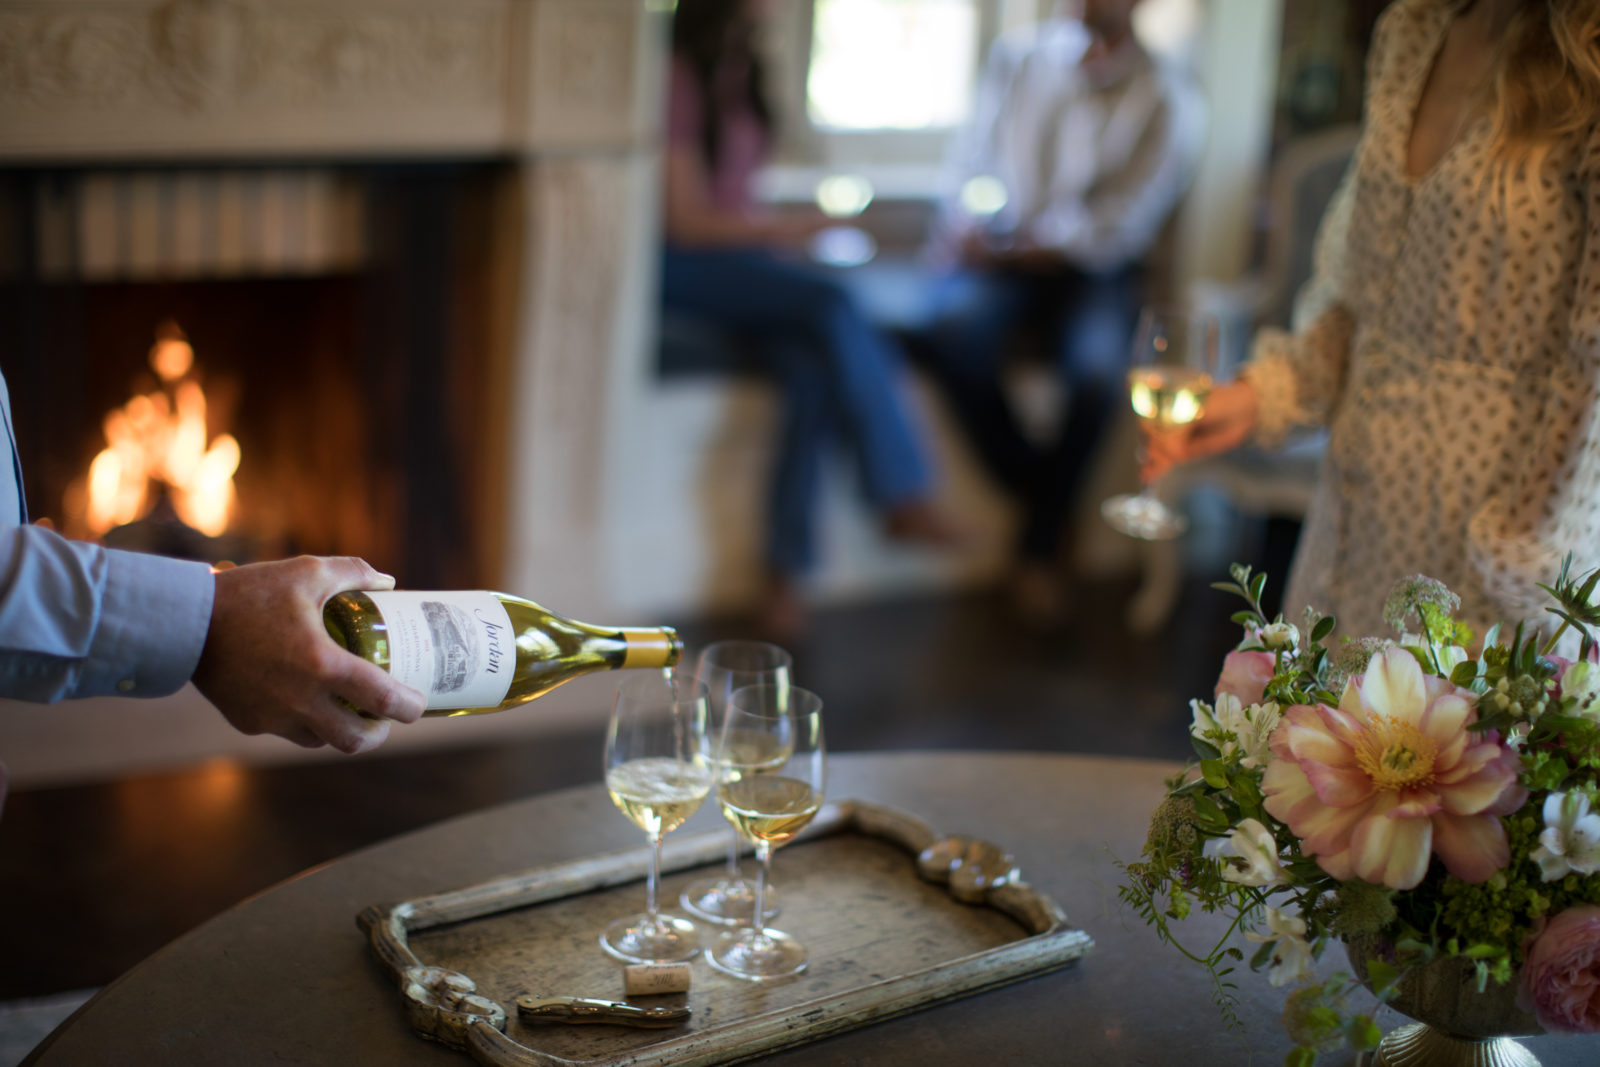 chardonnay pouring in wine glass with fireplace in the background